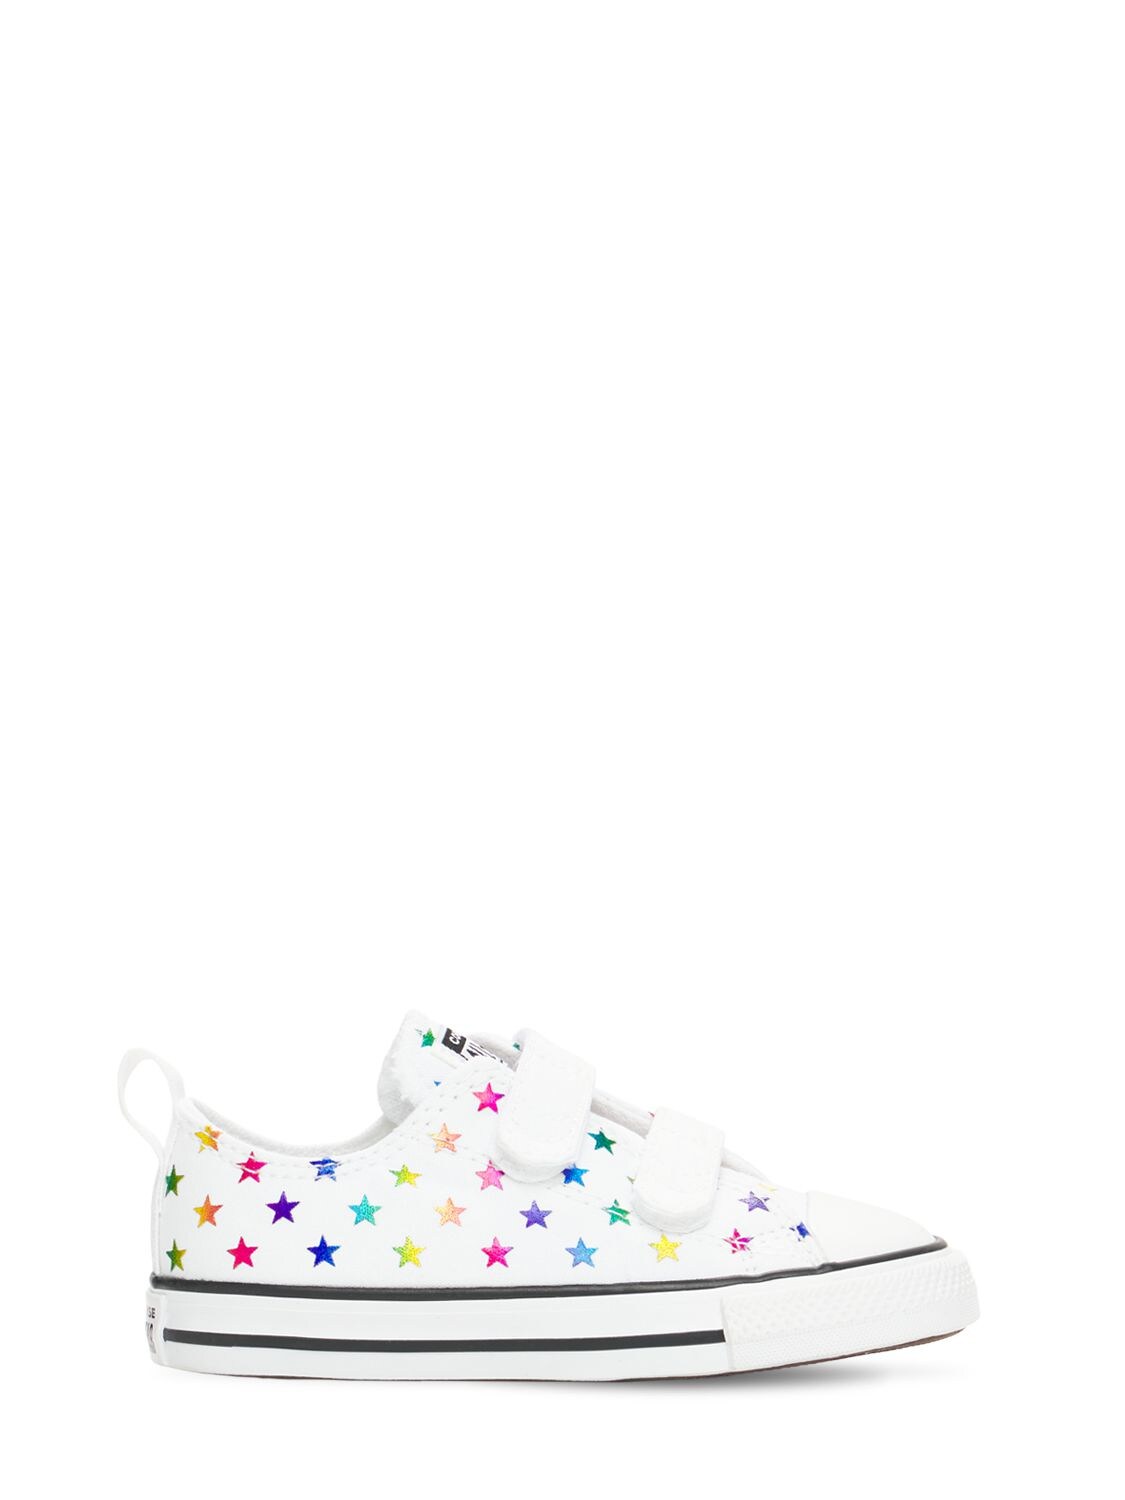 Converse Kids' Stars Chuck Taylor All Star Sneakers In White